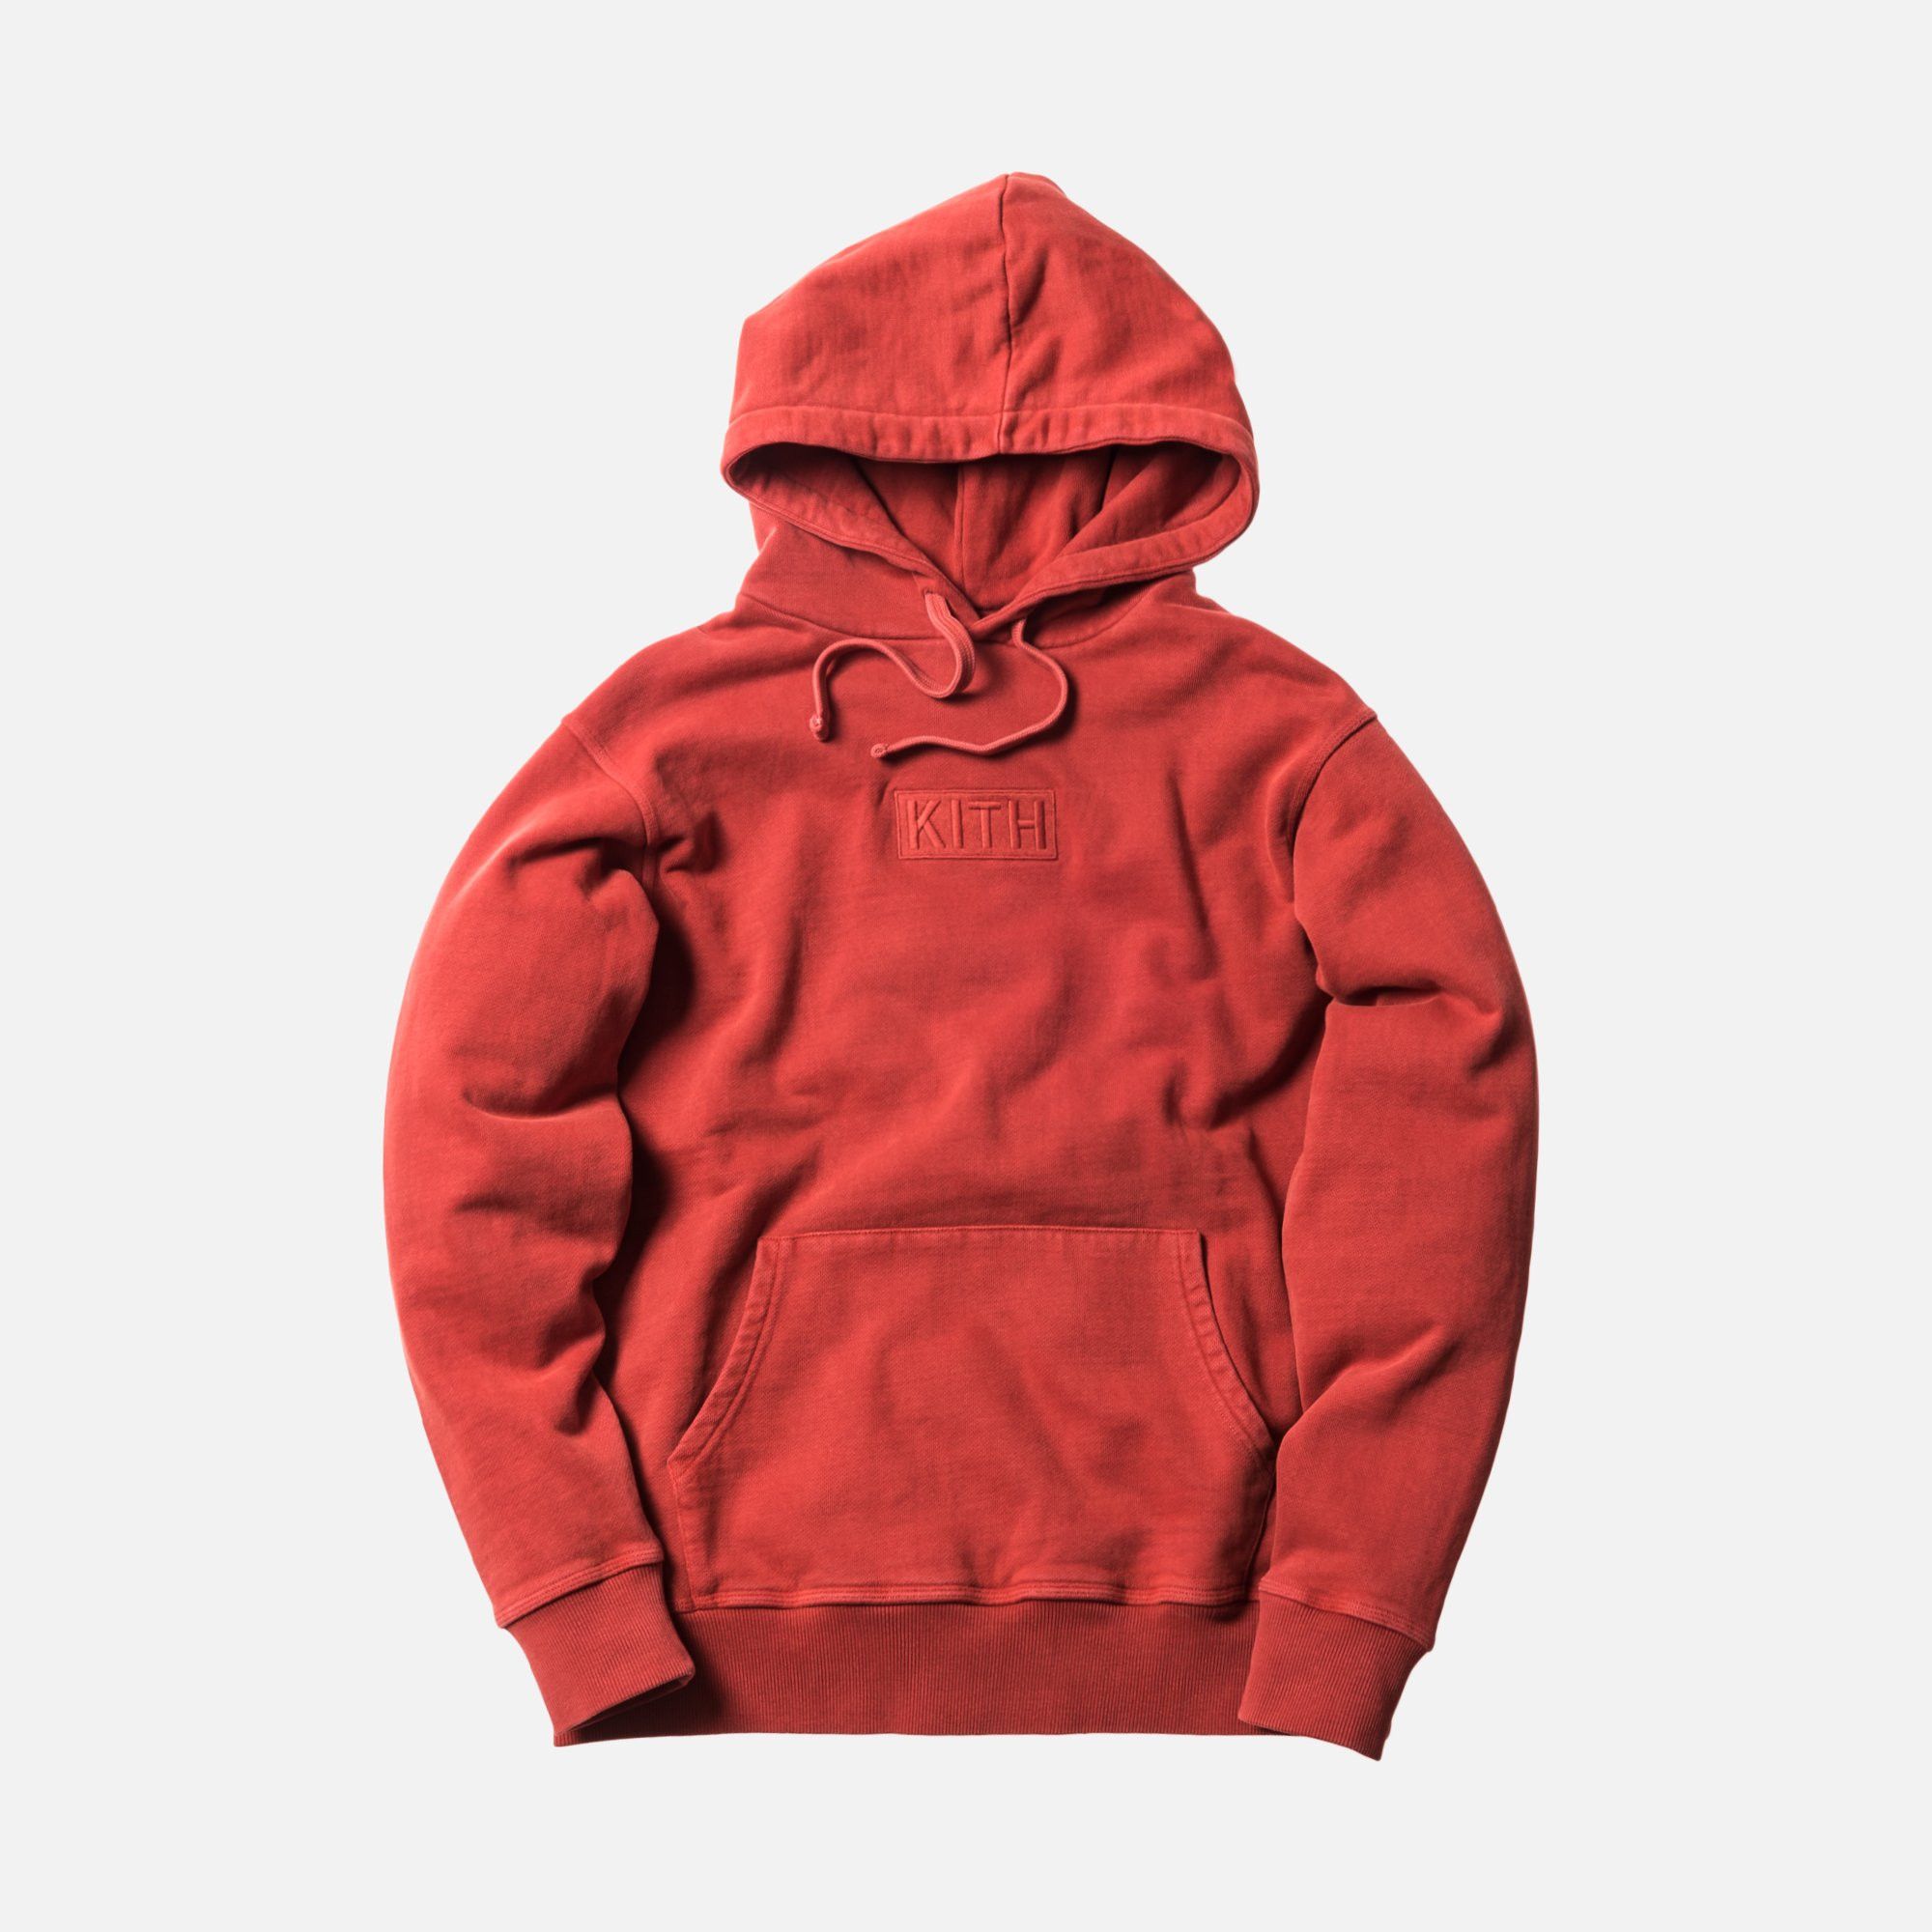 Kith KITH CLASSIC LOGO HOODIE TERRACOTTA RED | Grailed